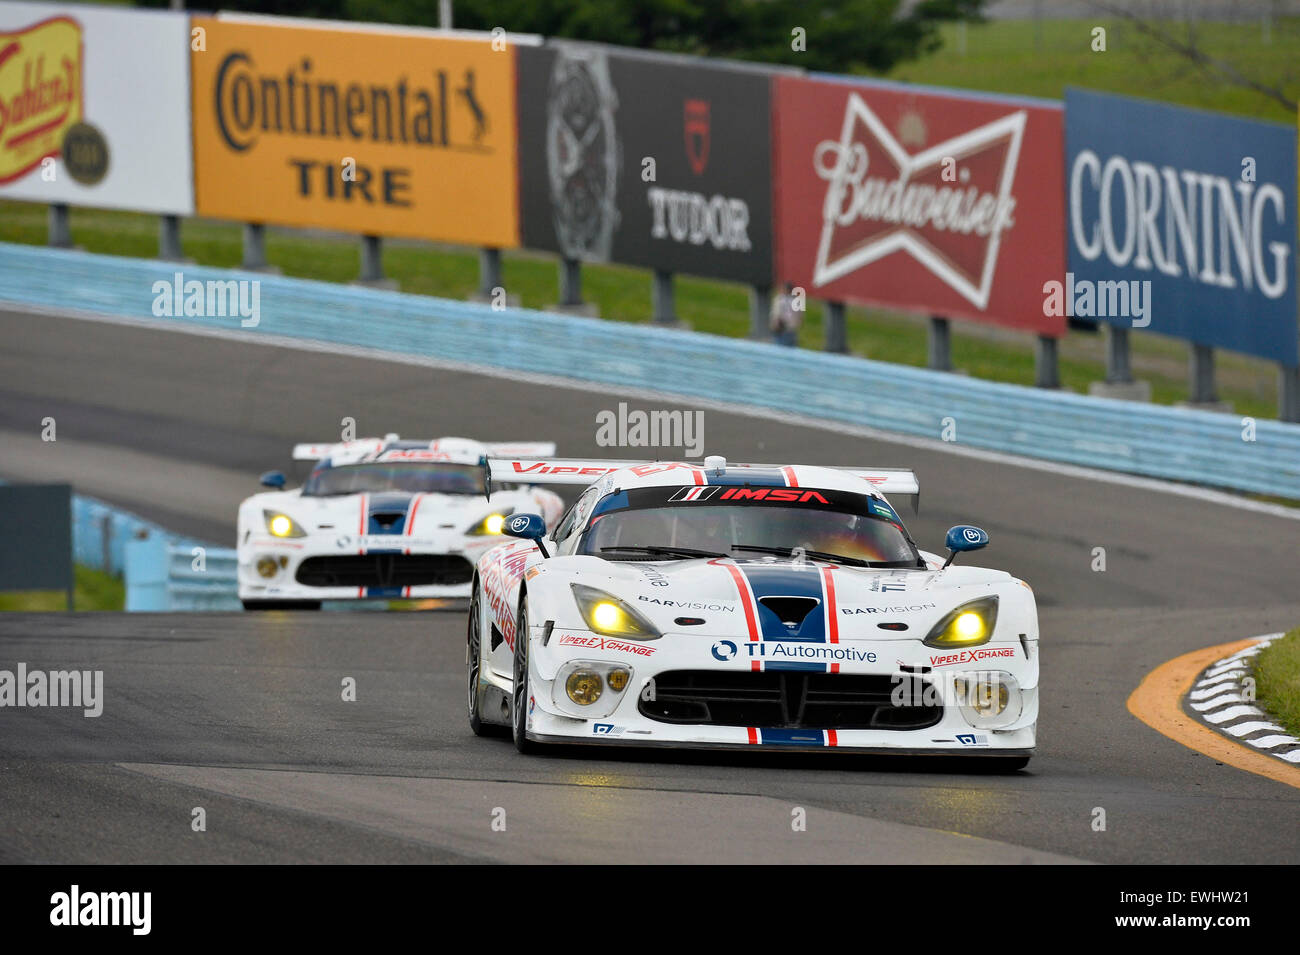 March 14, 2015 - Watkins Glen, NY, U.S. - Watkins Glen, NY - Jun 26, 2015: The Riley Motorsports Dodge Viper SRT races through the turns during a practice session for the Sahlens Six Hours of The Glen for the TUDOR Championship at Watkins Glen International in Watkins Glen, NY. Stock Photo